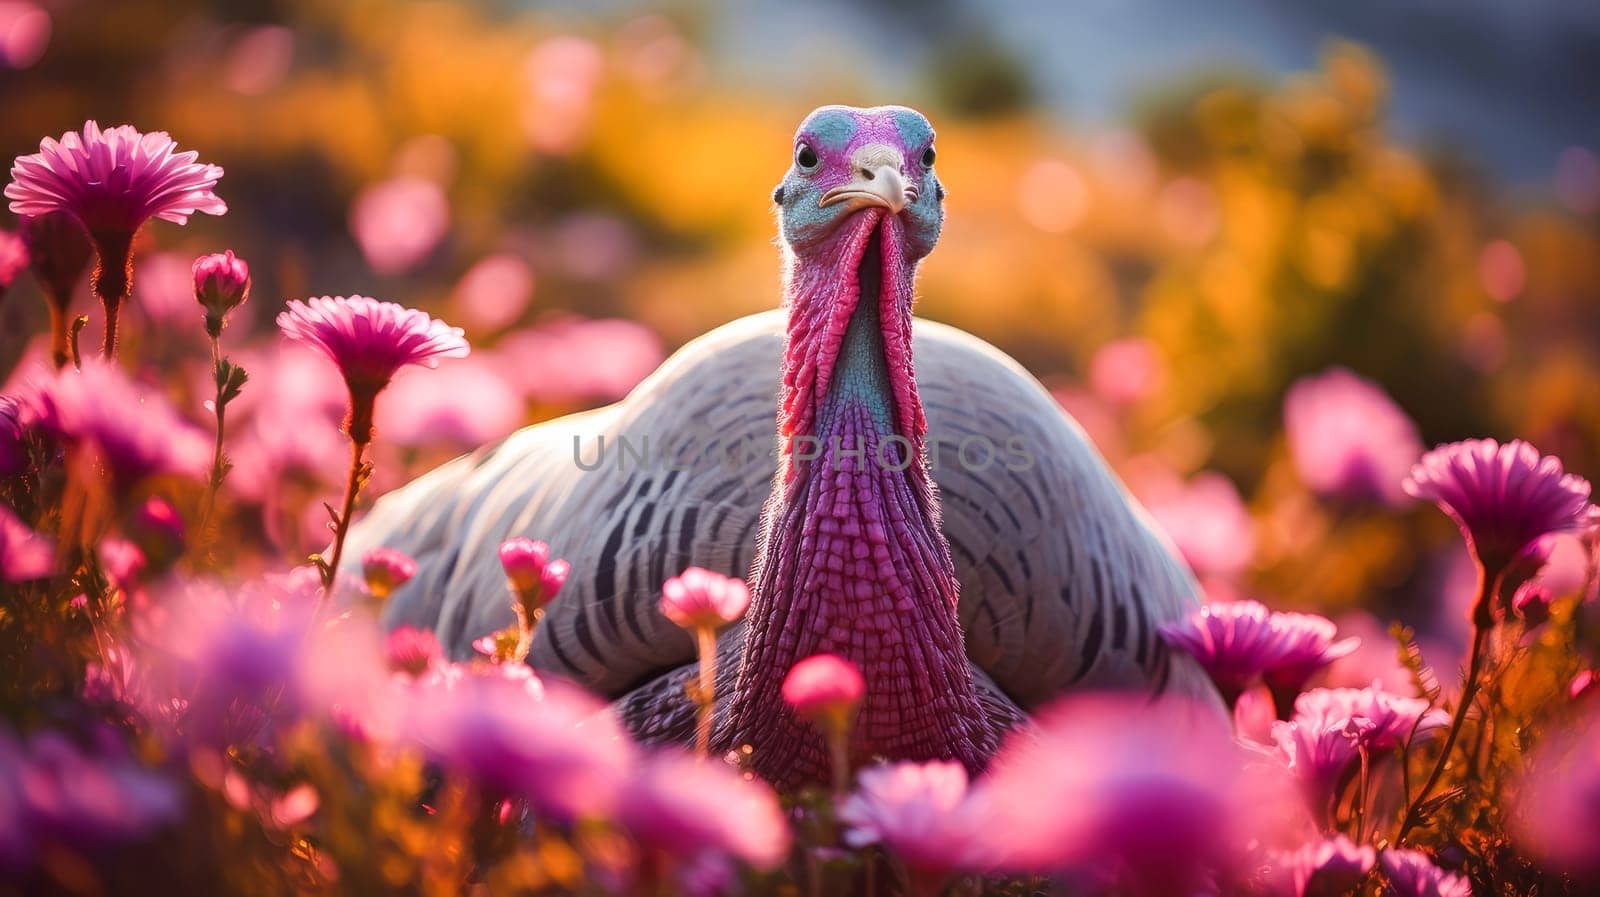 Cute, beautiful turkey in a field with flowers in nature, in the sun's rays. by Alla_Yurtayeva